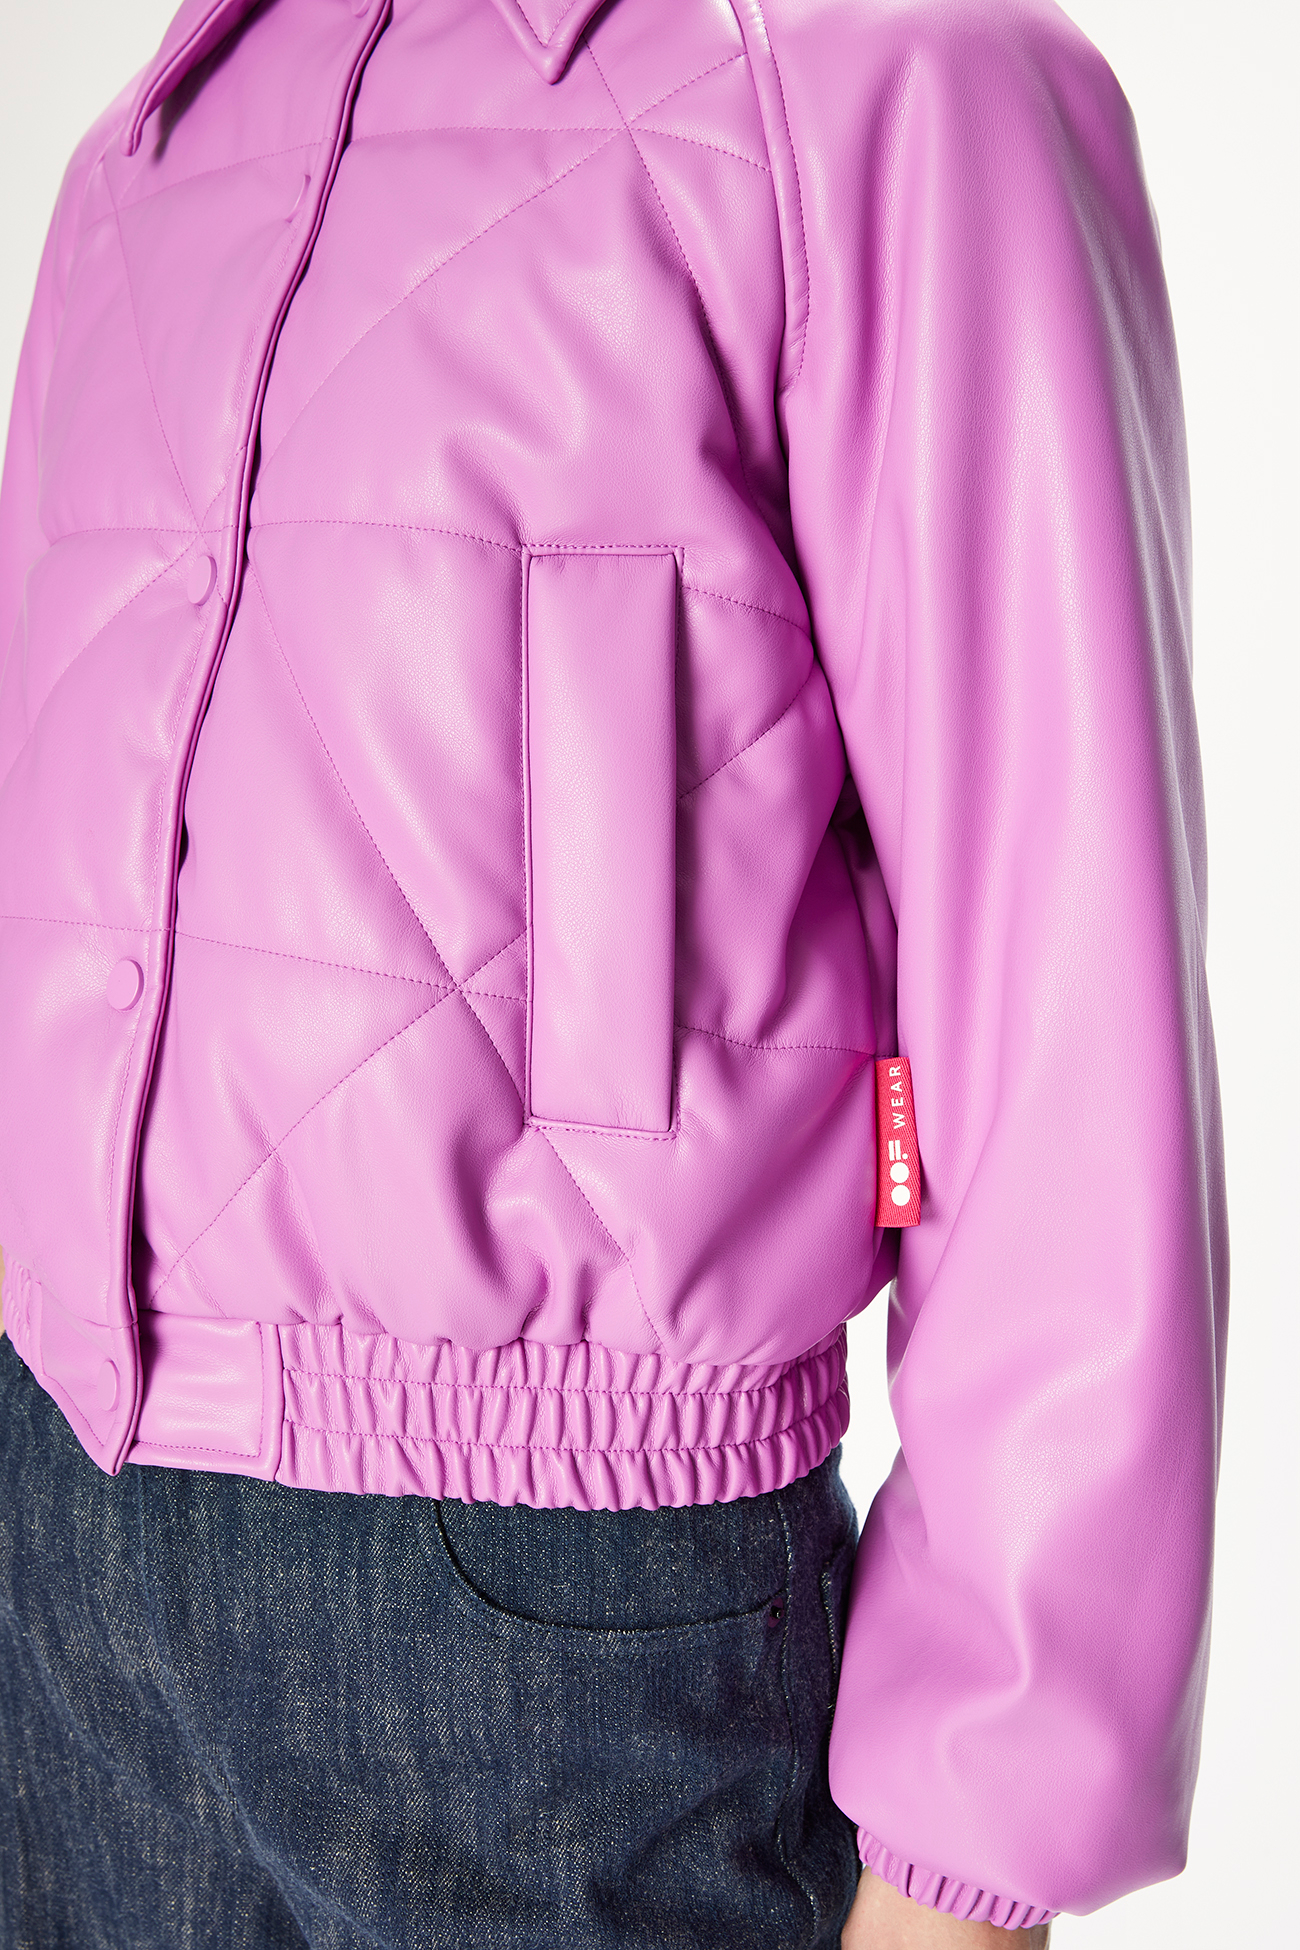 JACKET 9201 MADE IN ECO LEATHER - MAUVE - OOF WEAR